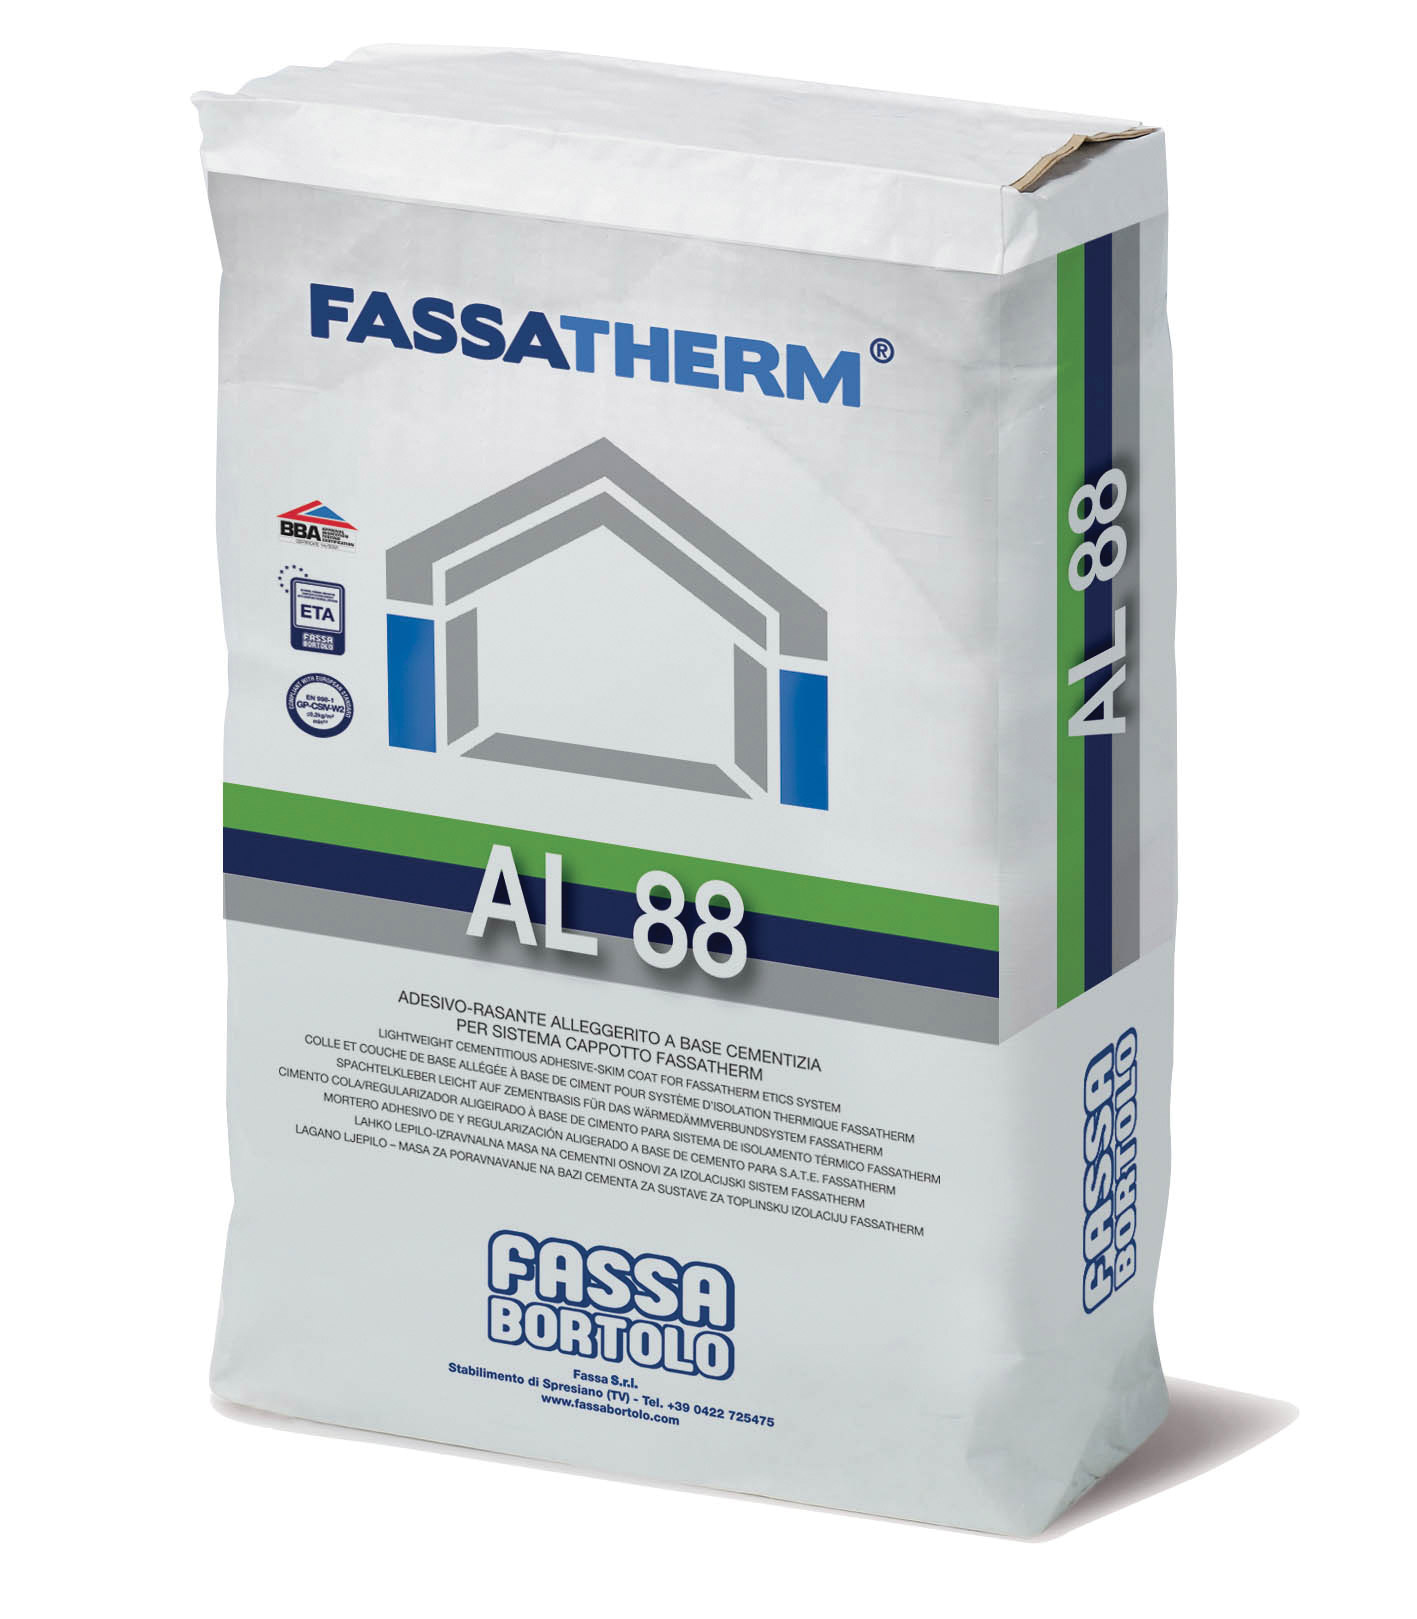 AL 88: White lightweight cement adhesive-skim coat for Fassatherm® systems